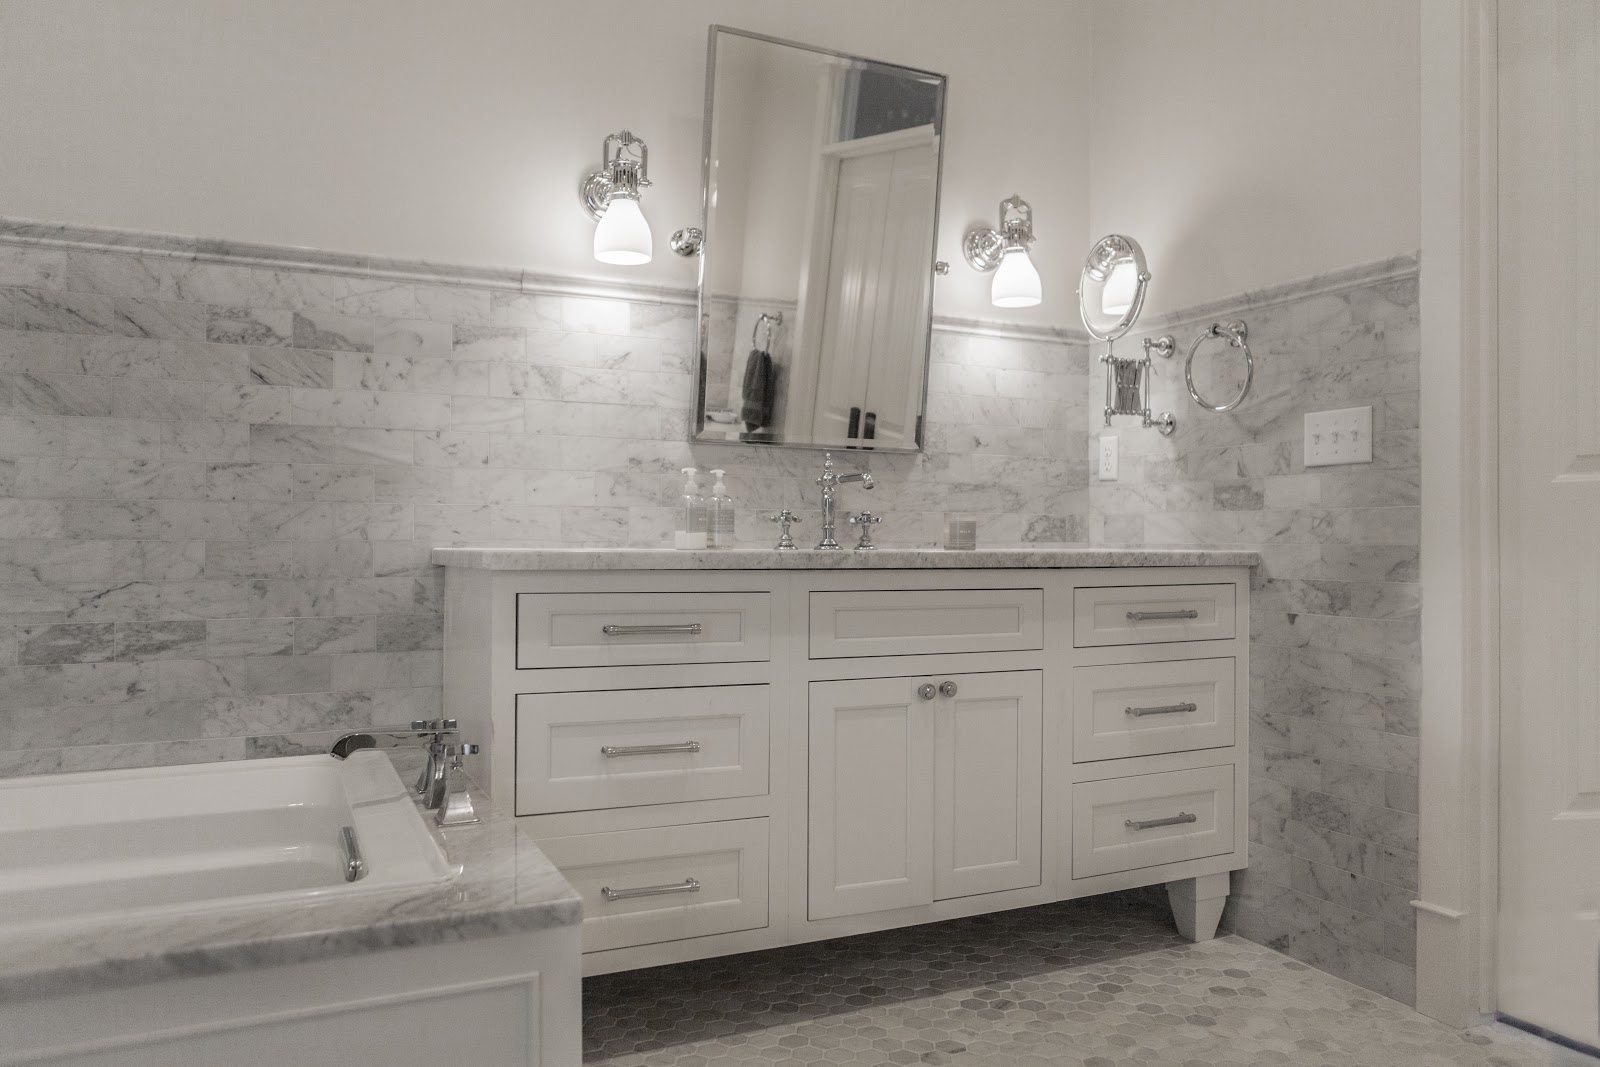 White and gray guest bathroom featuring a narrow wall mounted single sink vanity with drawers flanking either side of the under sink cabinet.  An adjustable large rectangular mirror hangs above the  sink with upside down tulip shaped sconces on either side.